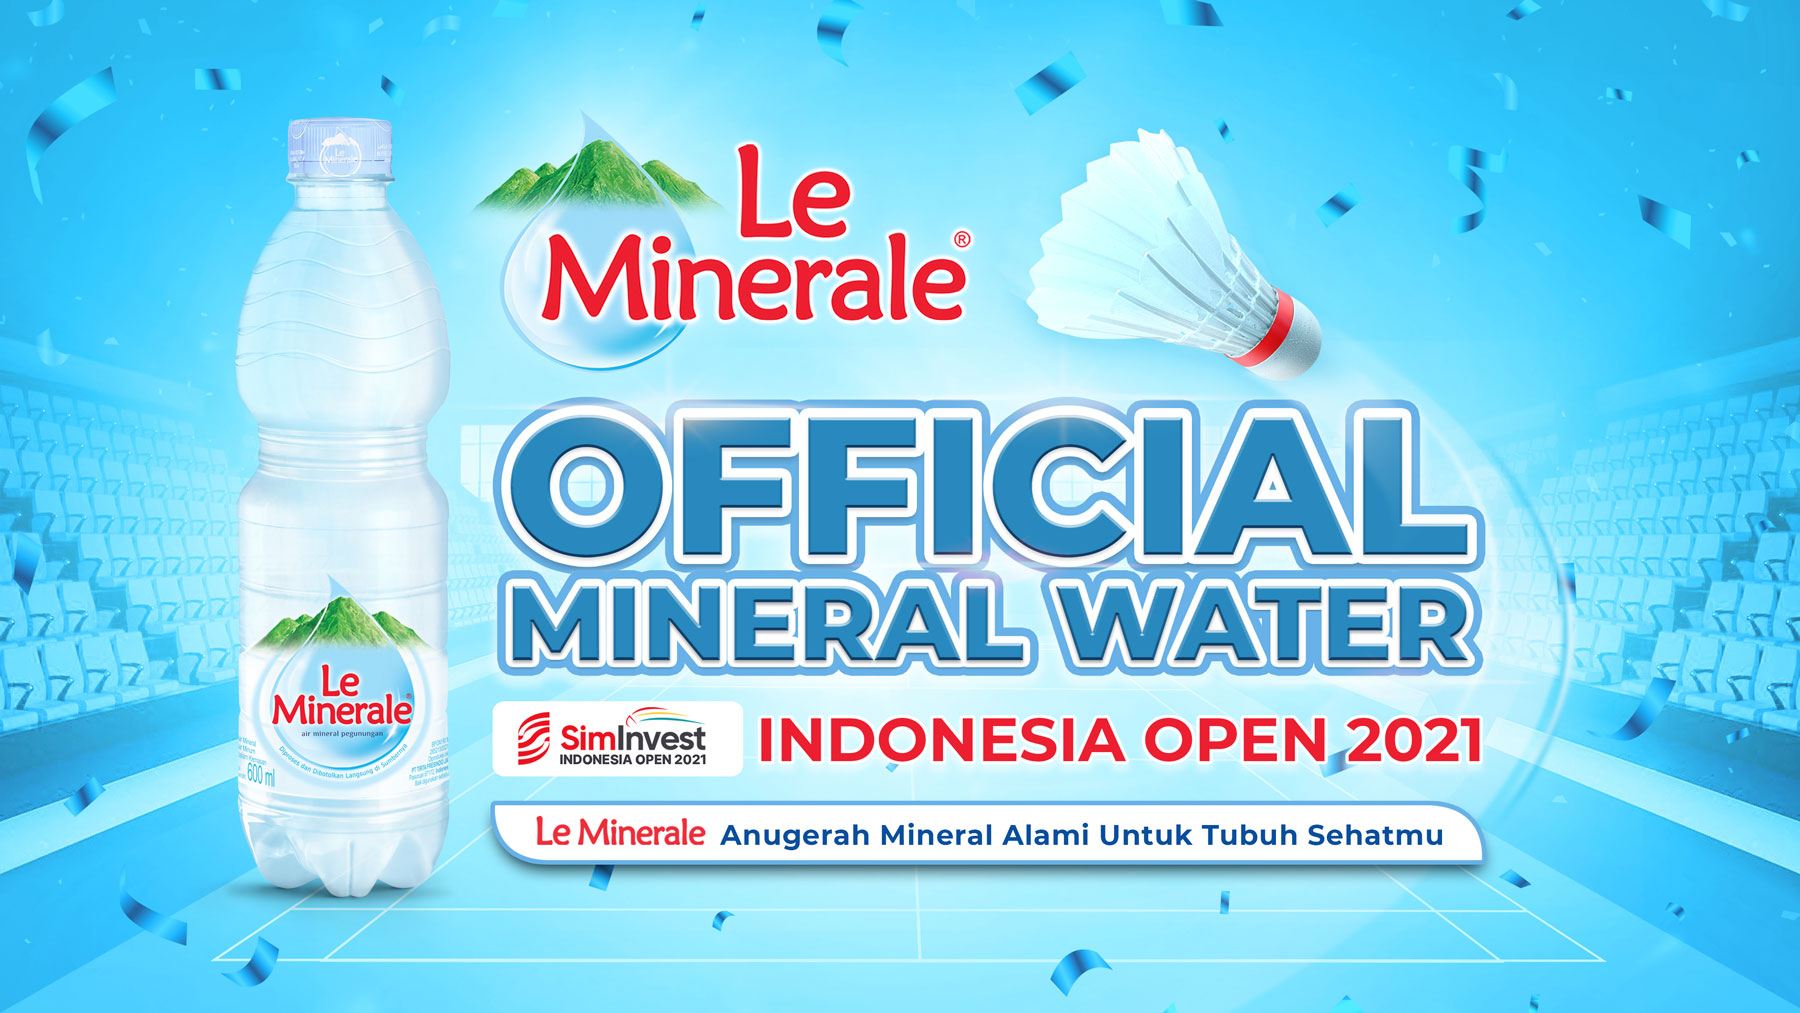 The Healthier Option, Le Minerale, is the Official Sponsor of Indonesia Open 2021